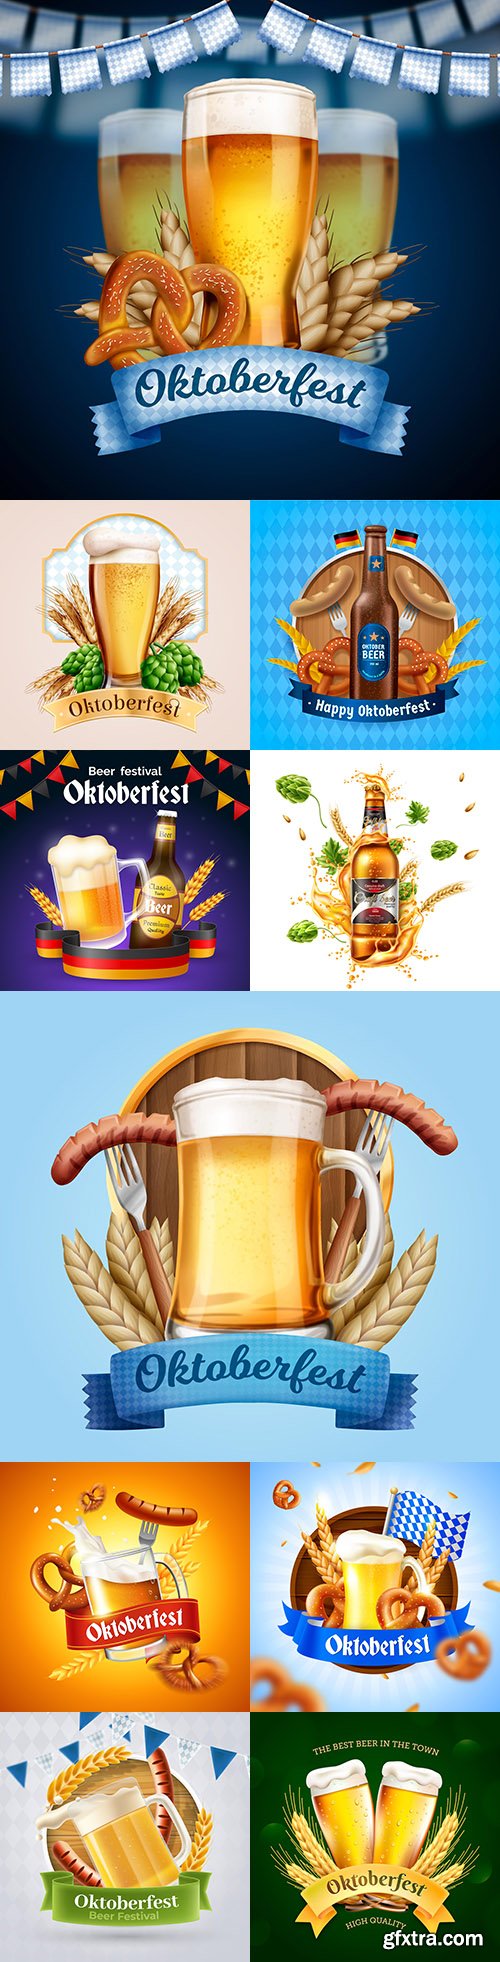 Realistic Oktoberfest banner with pint of beer illustration